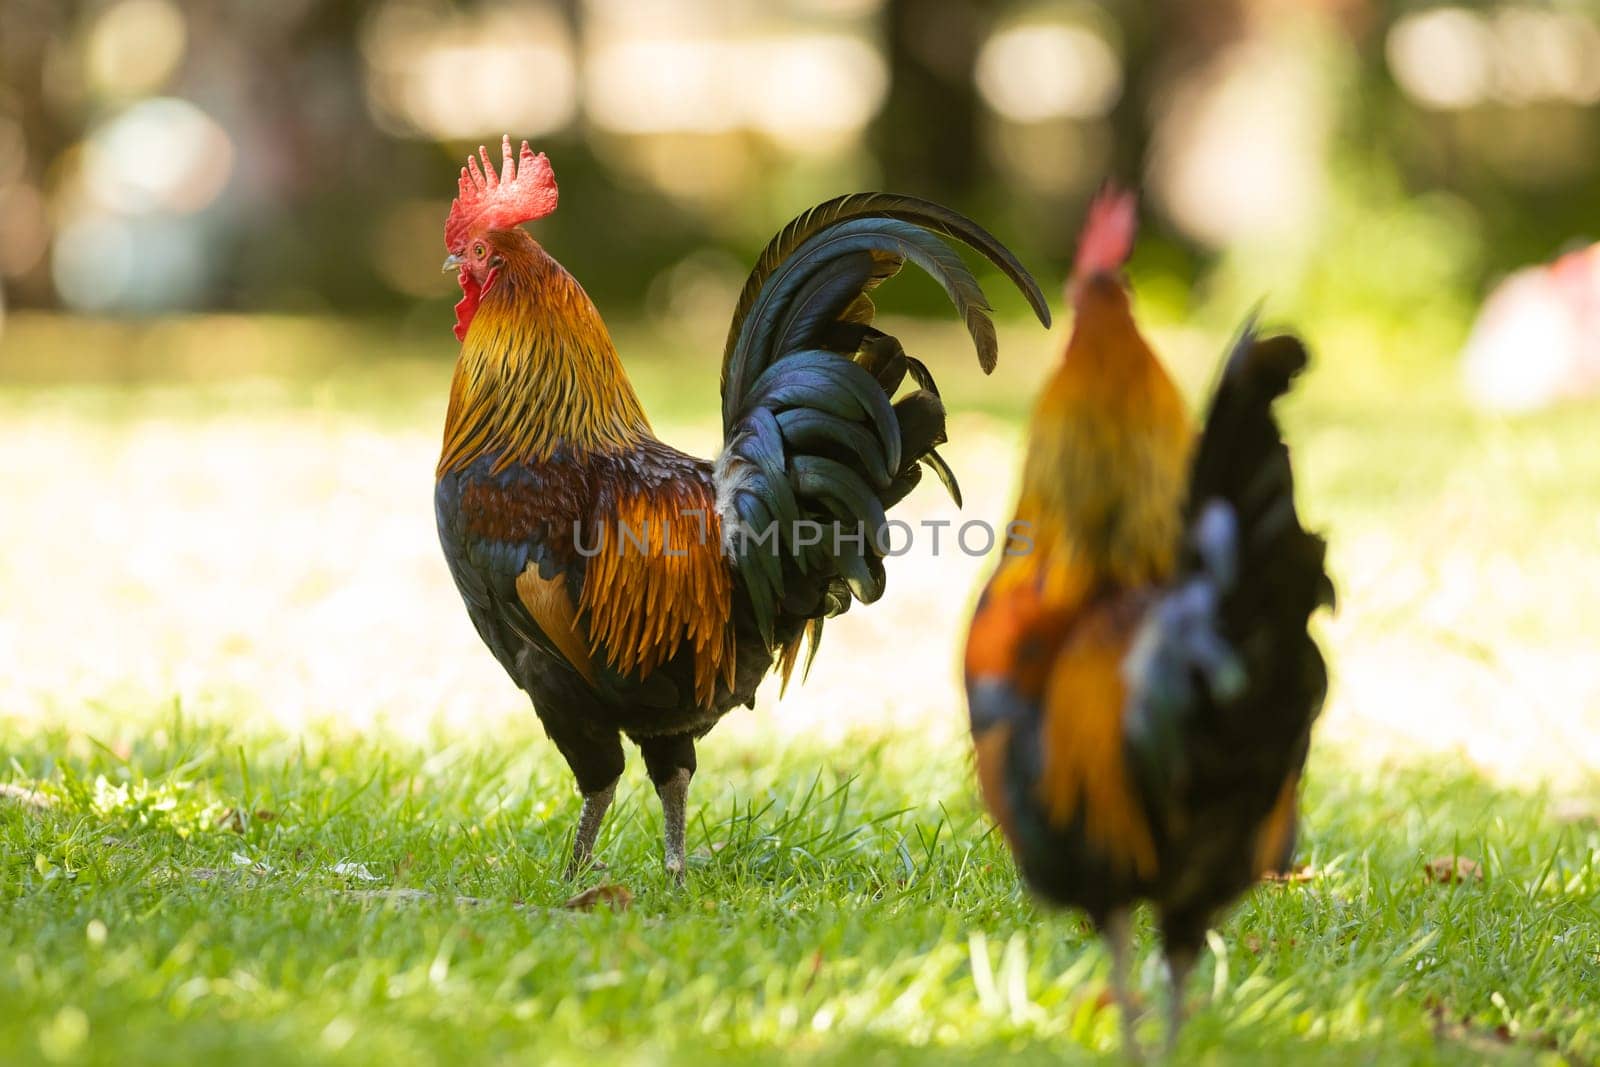 Roosters grazing on the green grass in the park. Mid shot